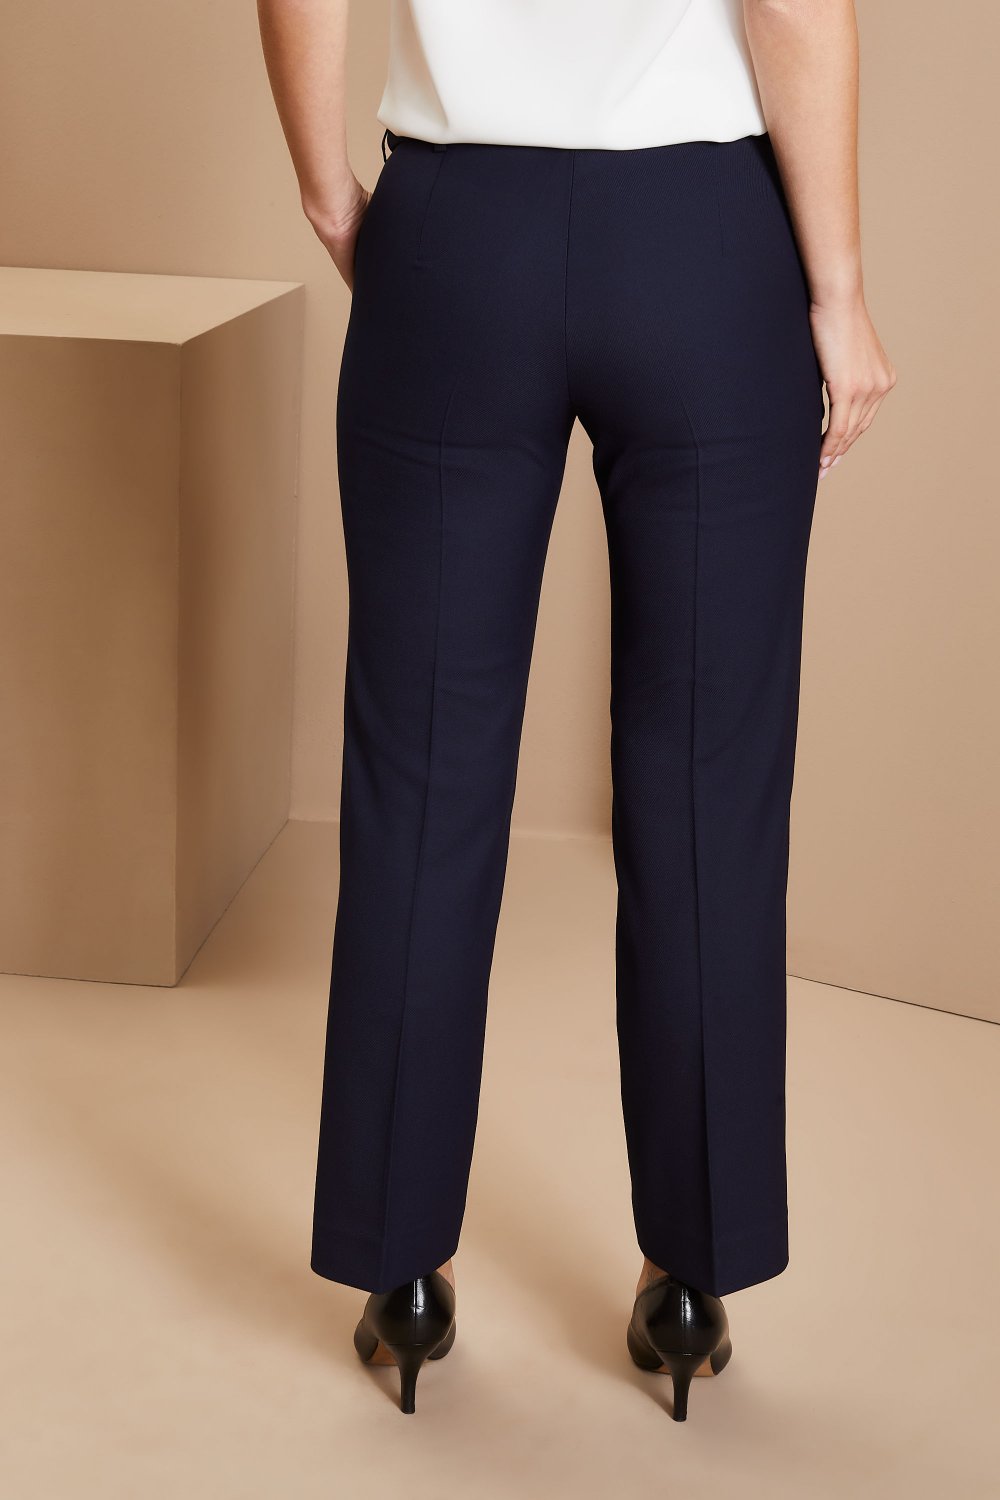 Straight leg pants women: Chic and Timeless插图4